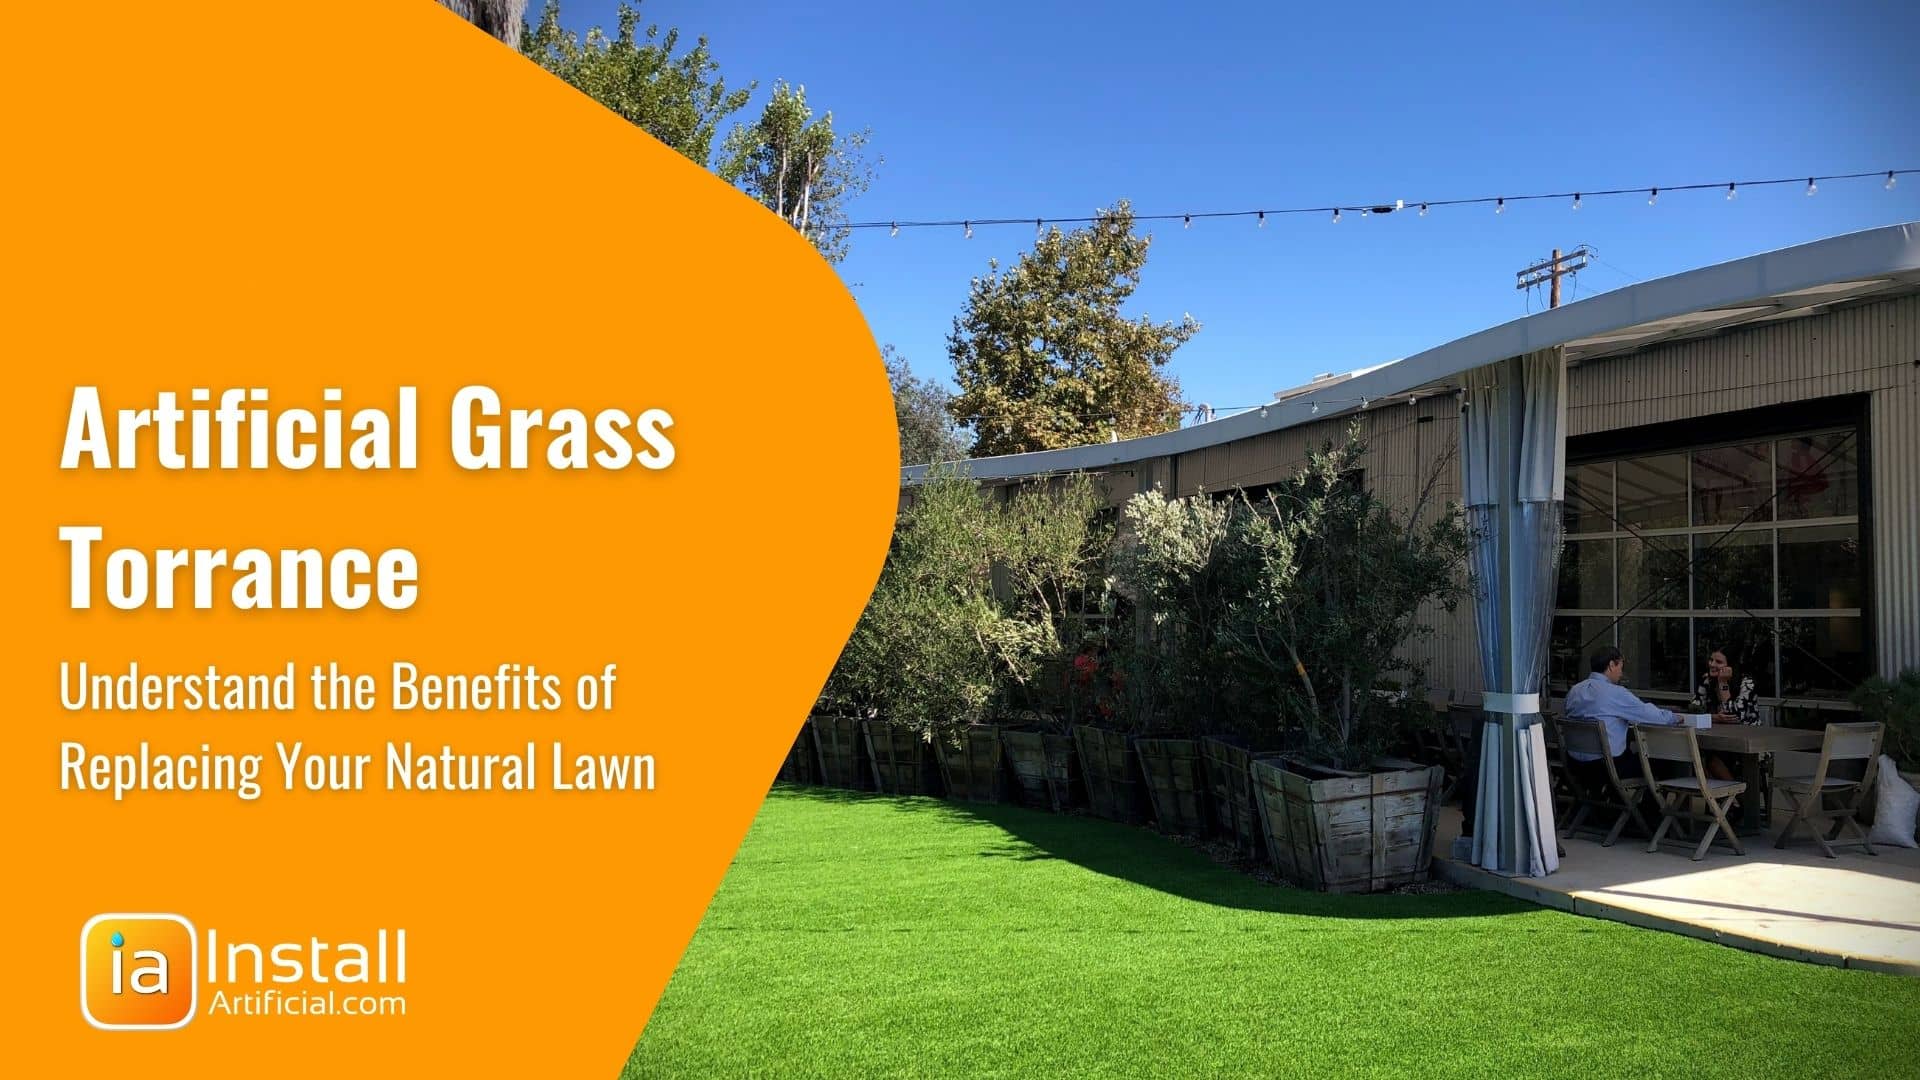 Replace Your Lawn With Artificial Turf in Torrance